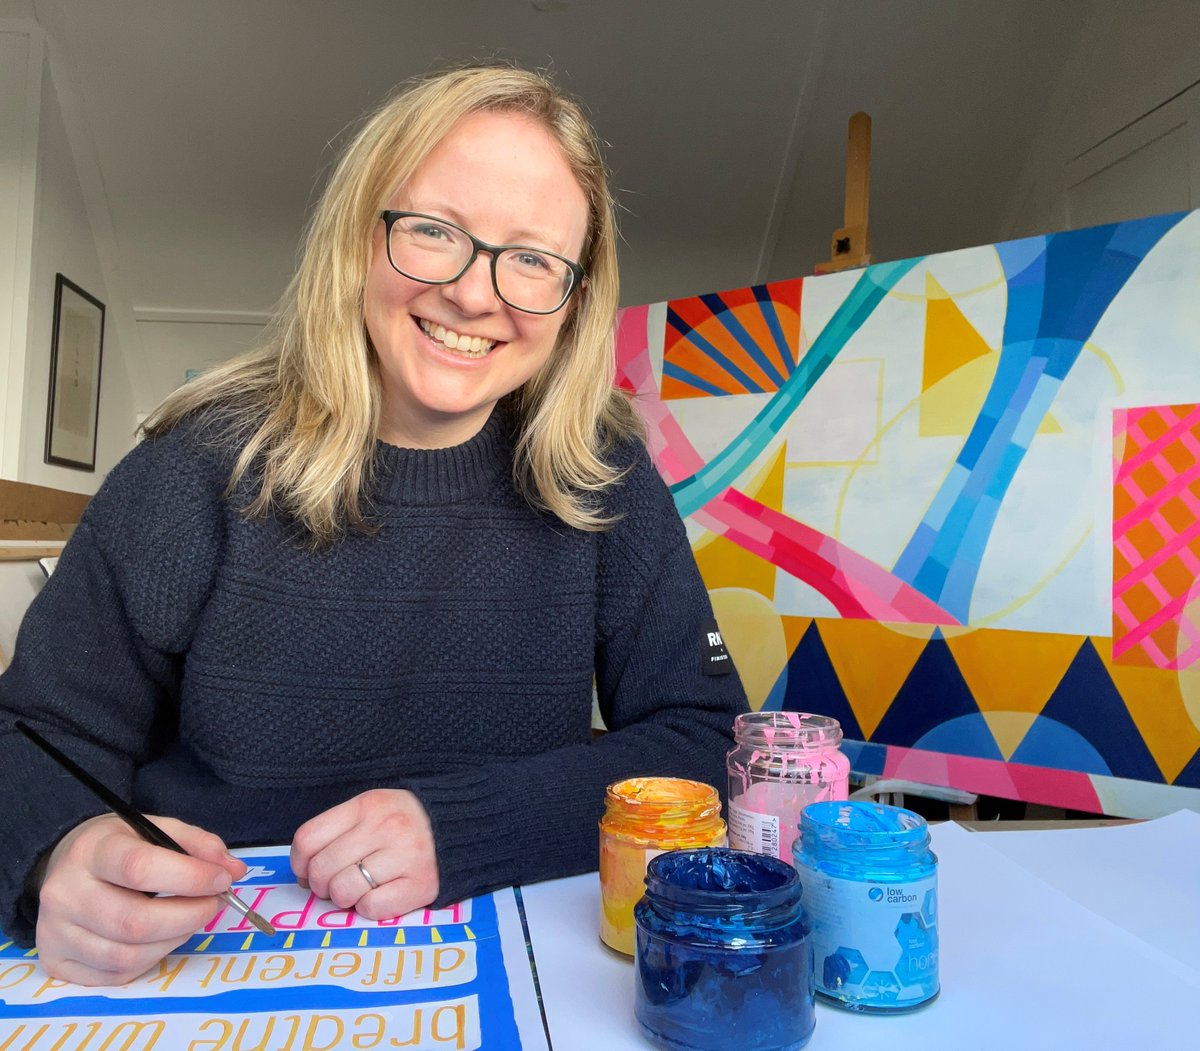 Artist and doctor sisters co-author art book promoting wellbeing through creativity. Full-time artist, @Epowellstudio, and her GP sister,@Dr_Sarah_Moore, both from Devon, have combined their affinity for art & wellbeing to get the nation painting🖌️Read: bit.ly/3HV1t5r